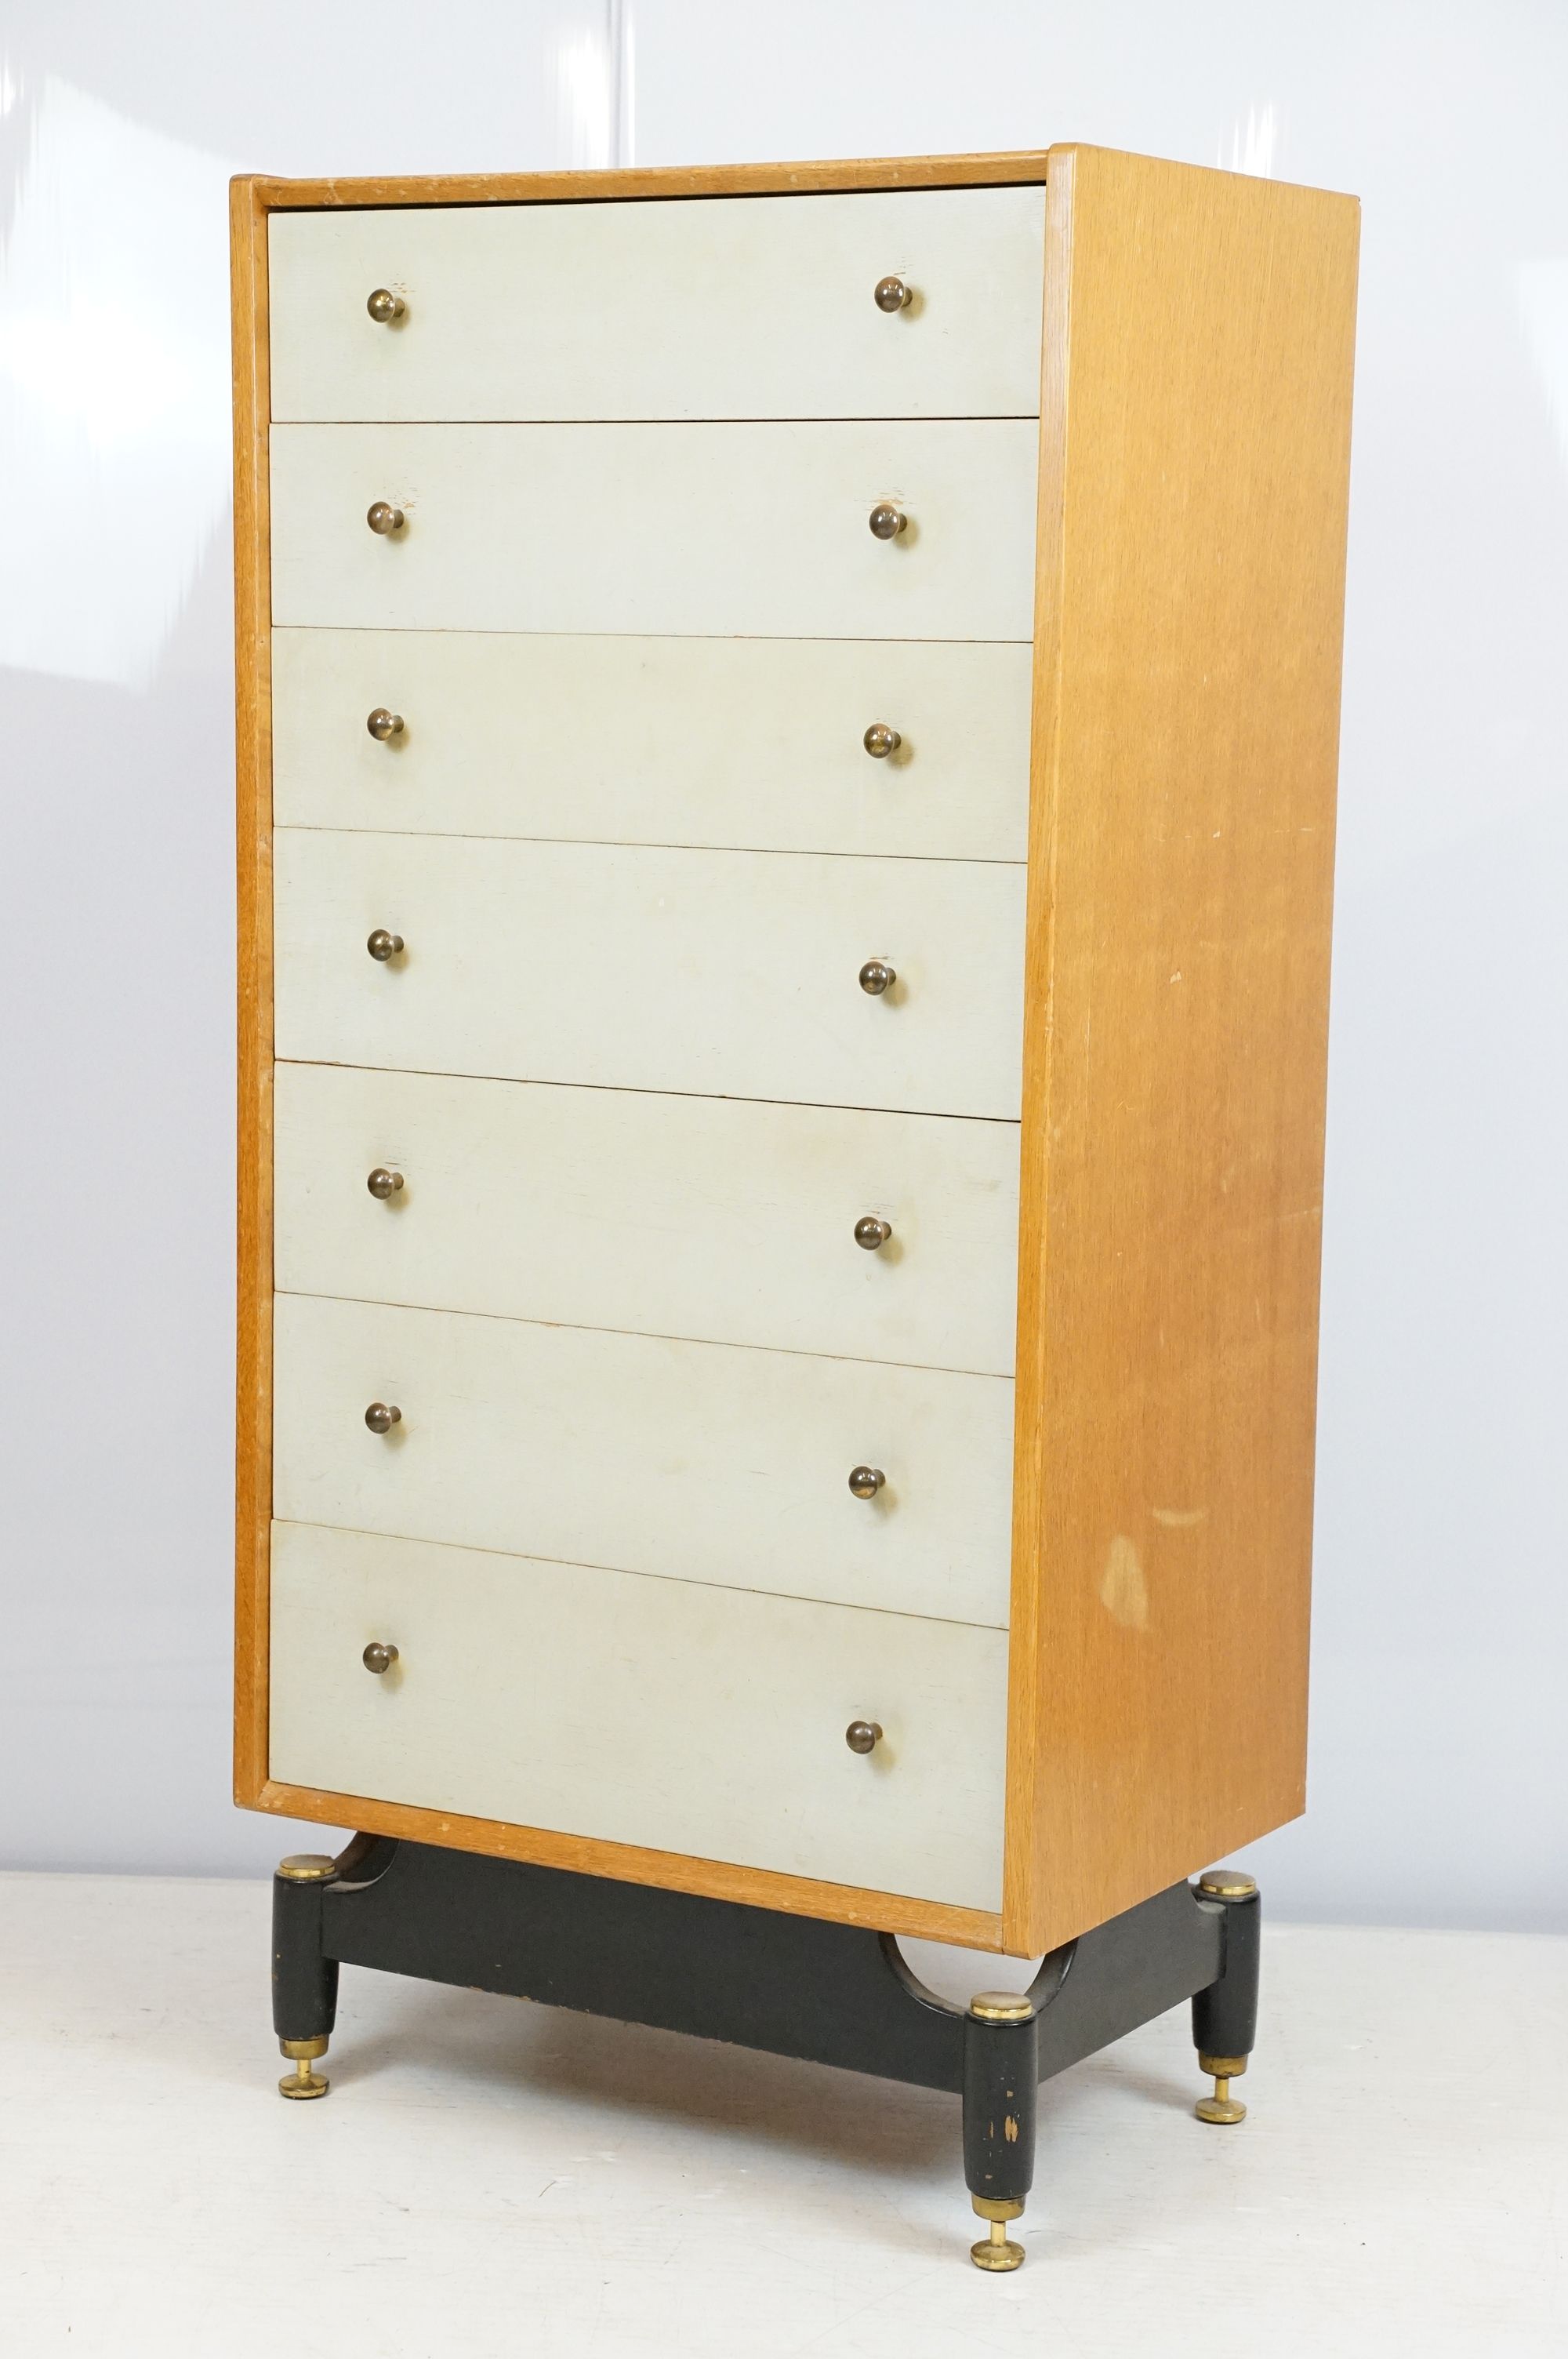 Mid century G Plan Librenza chest of seven drawers, with embossed G Plan logo and retailer's label